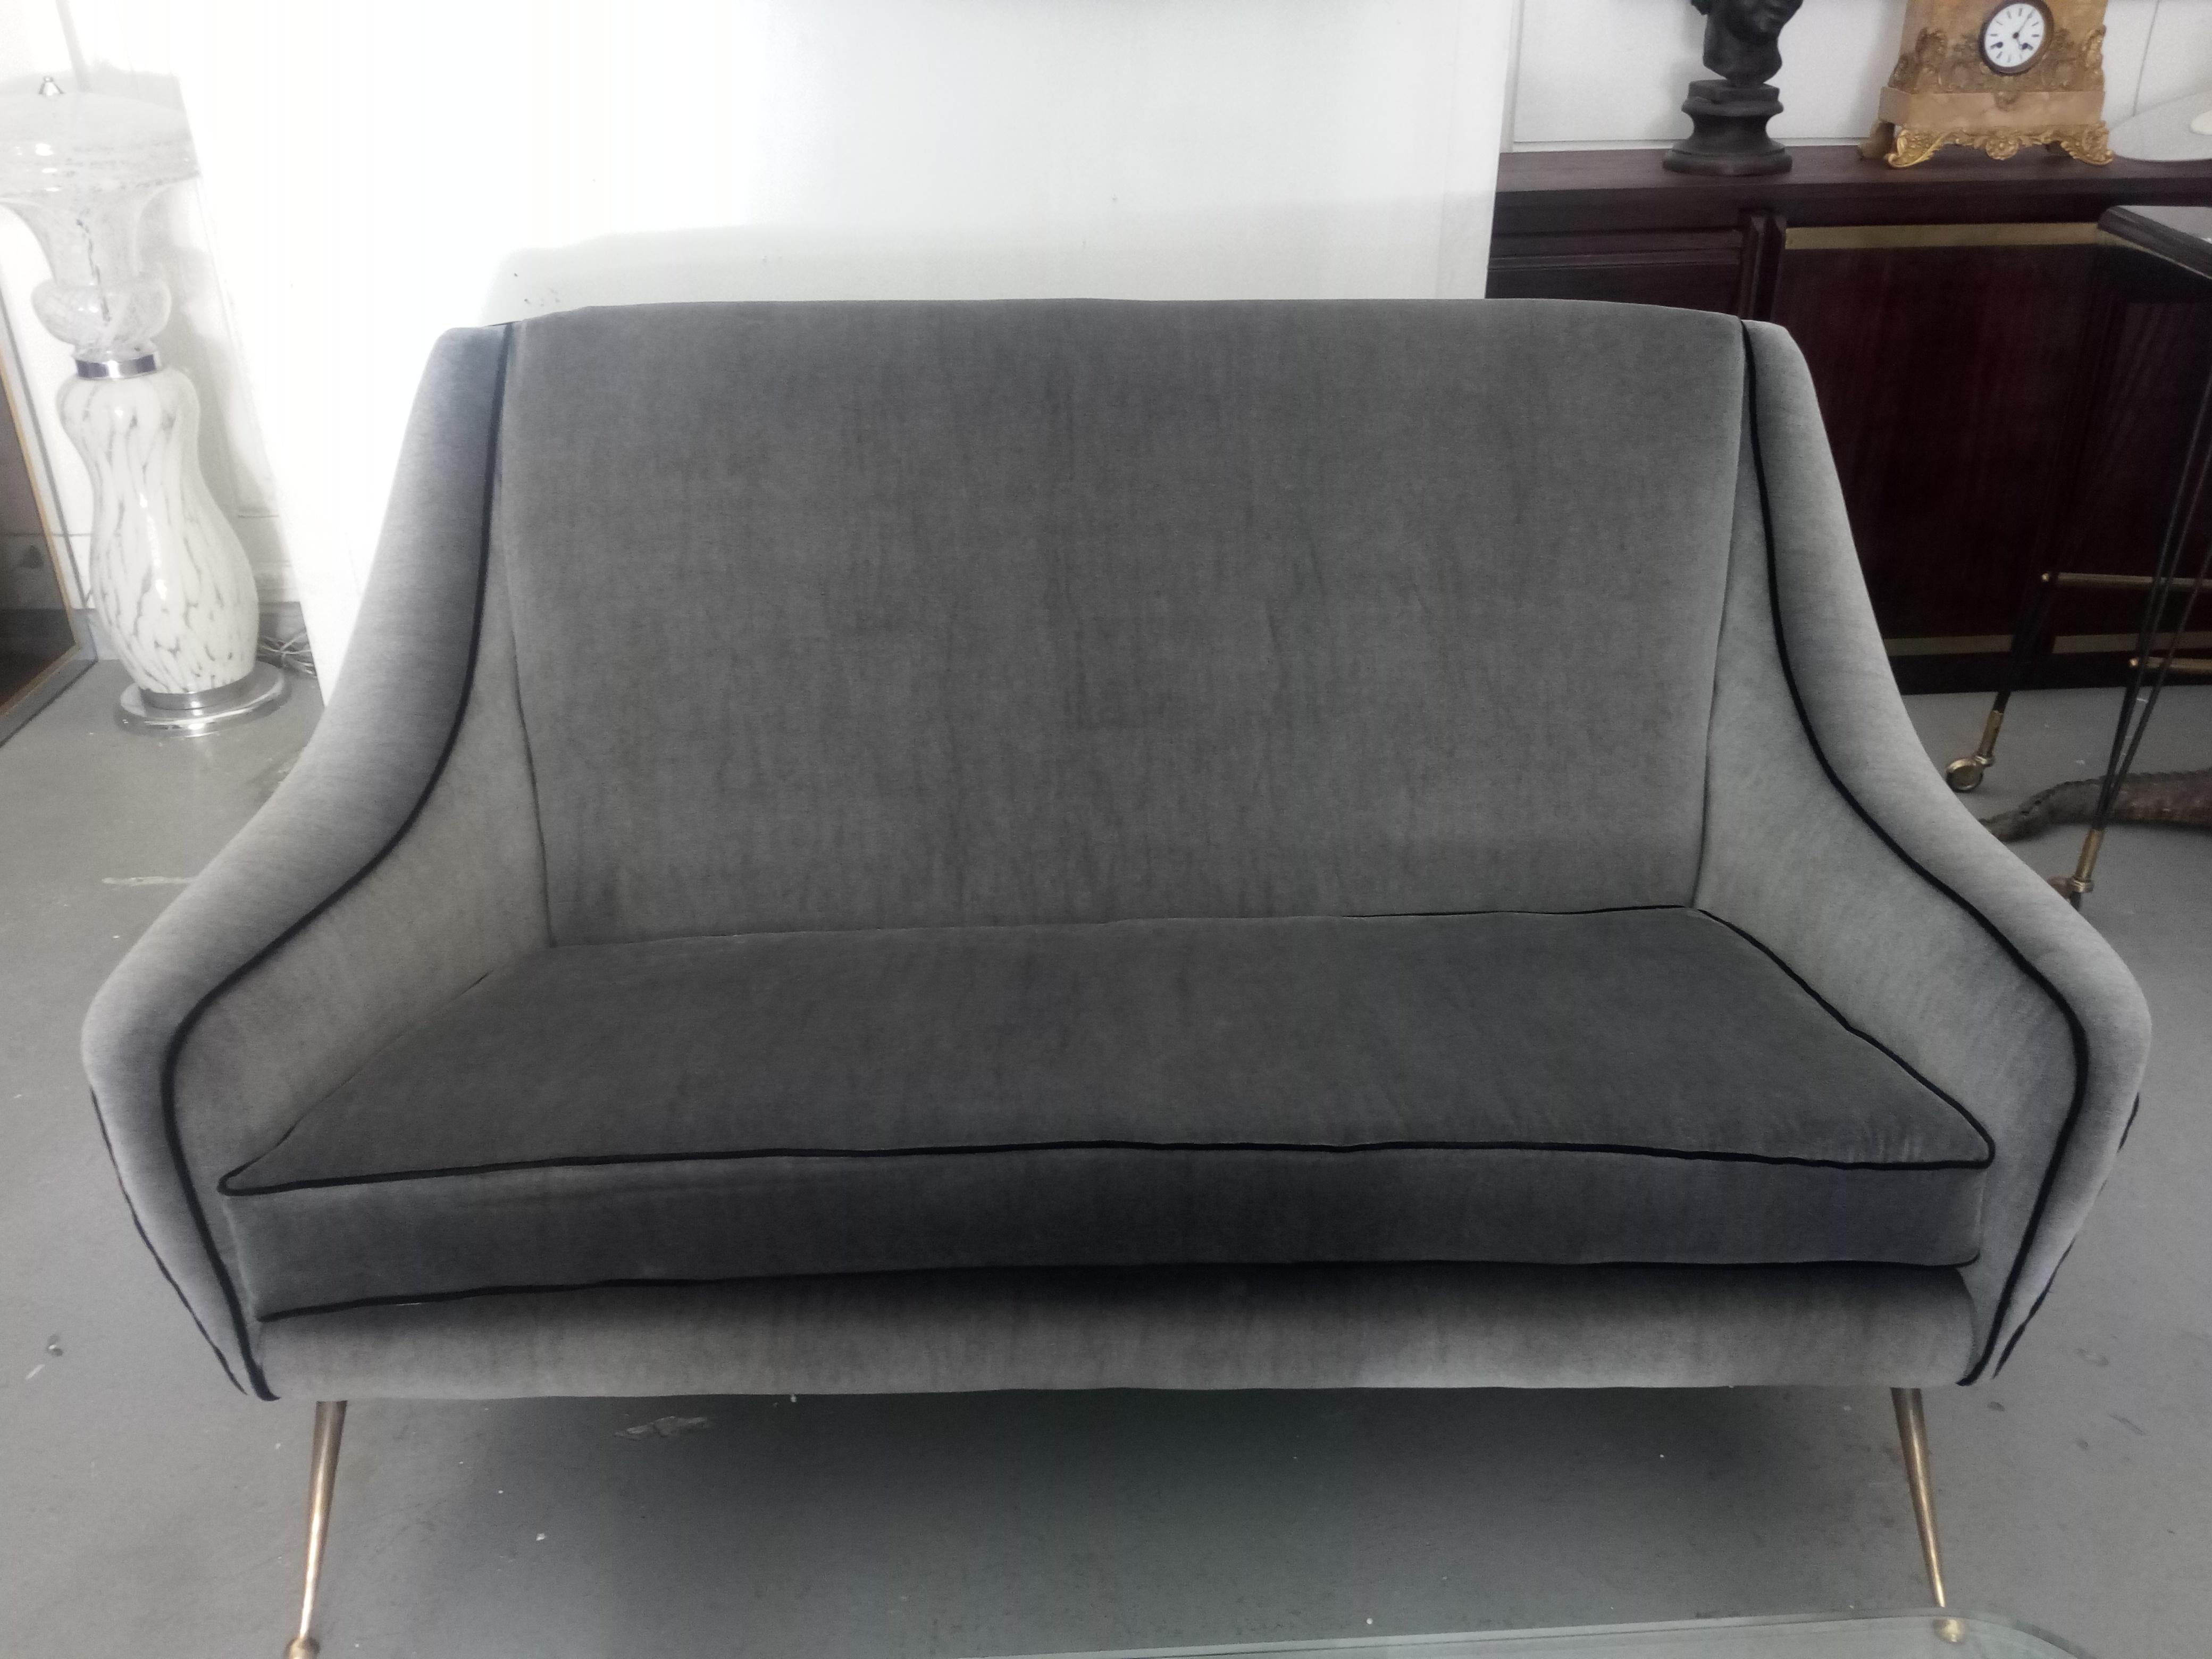 1950, elegant Italian sofa with brass feet, upholstered in gray fabric with black borders.